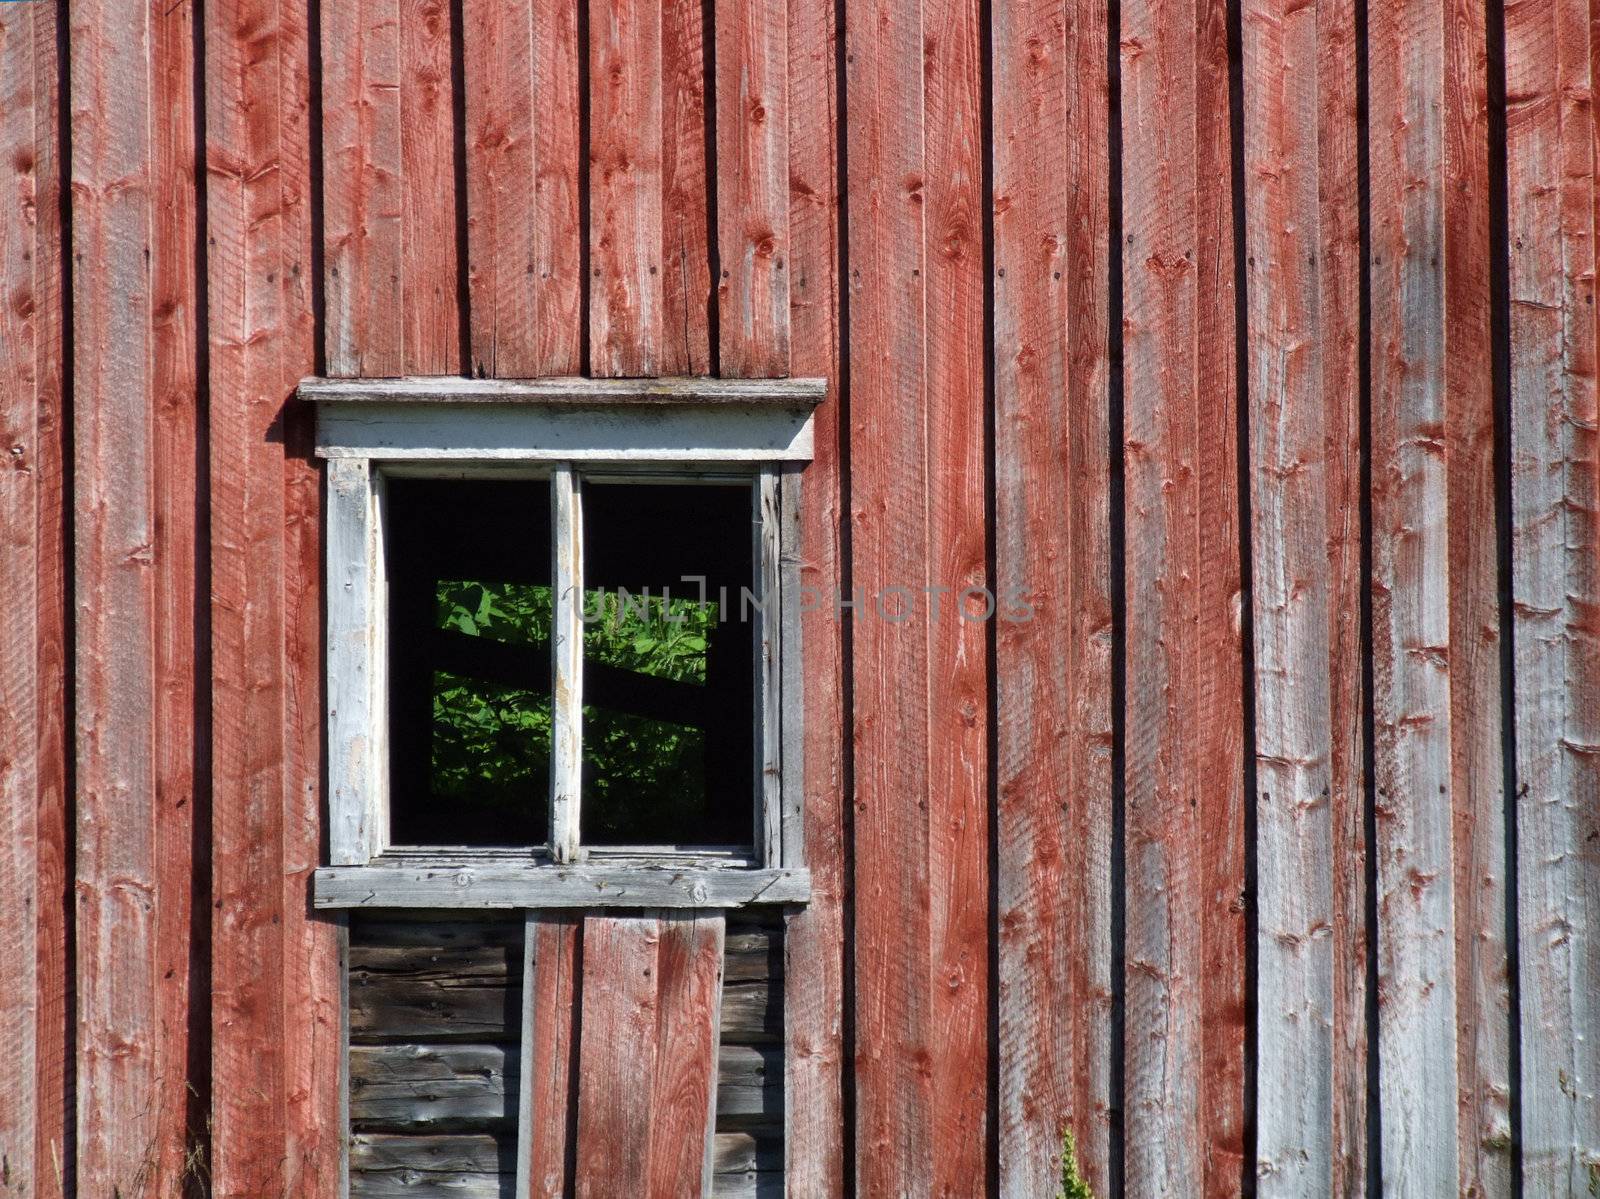 Empty window without glass in an old Norwegian farm building.